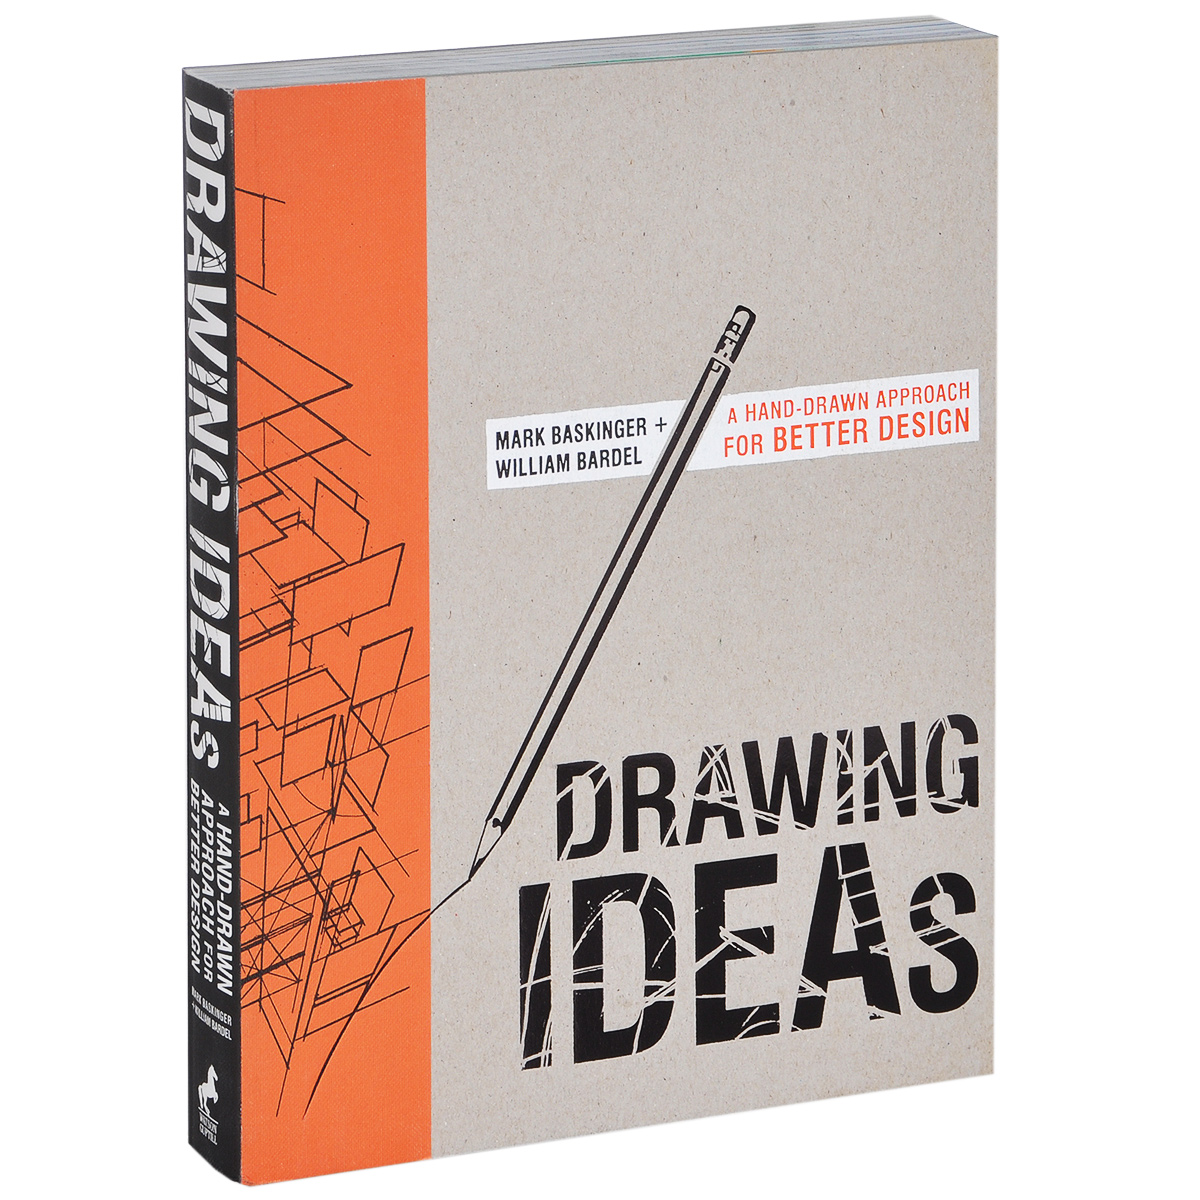 Mark Baskinger, William Bardel - «Drawing Ideas: A Hand-Drawn Approach for Better Design»